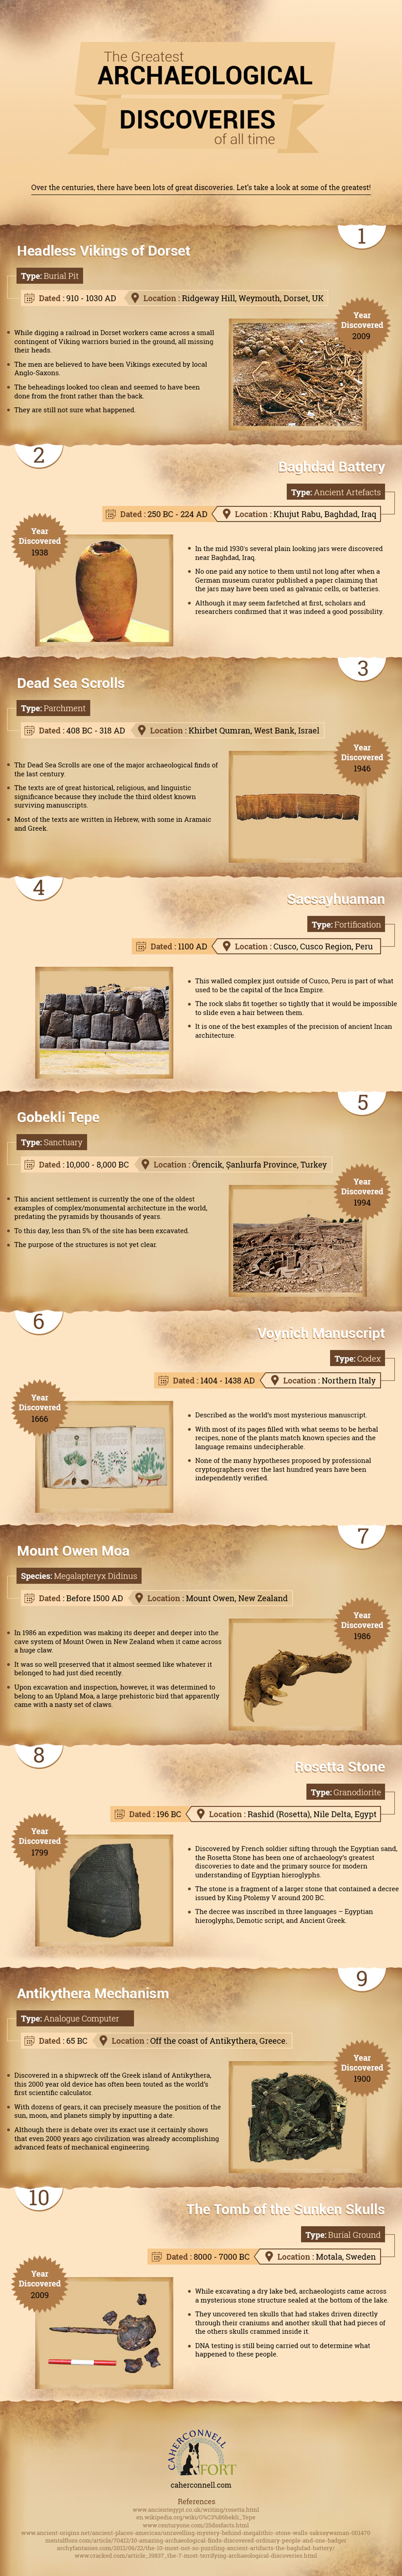 Greatest Archaeological Discoveries Of All Time - History Infographic